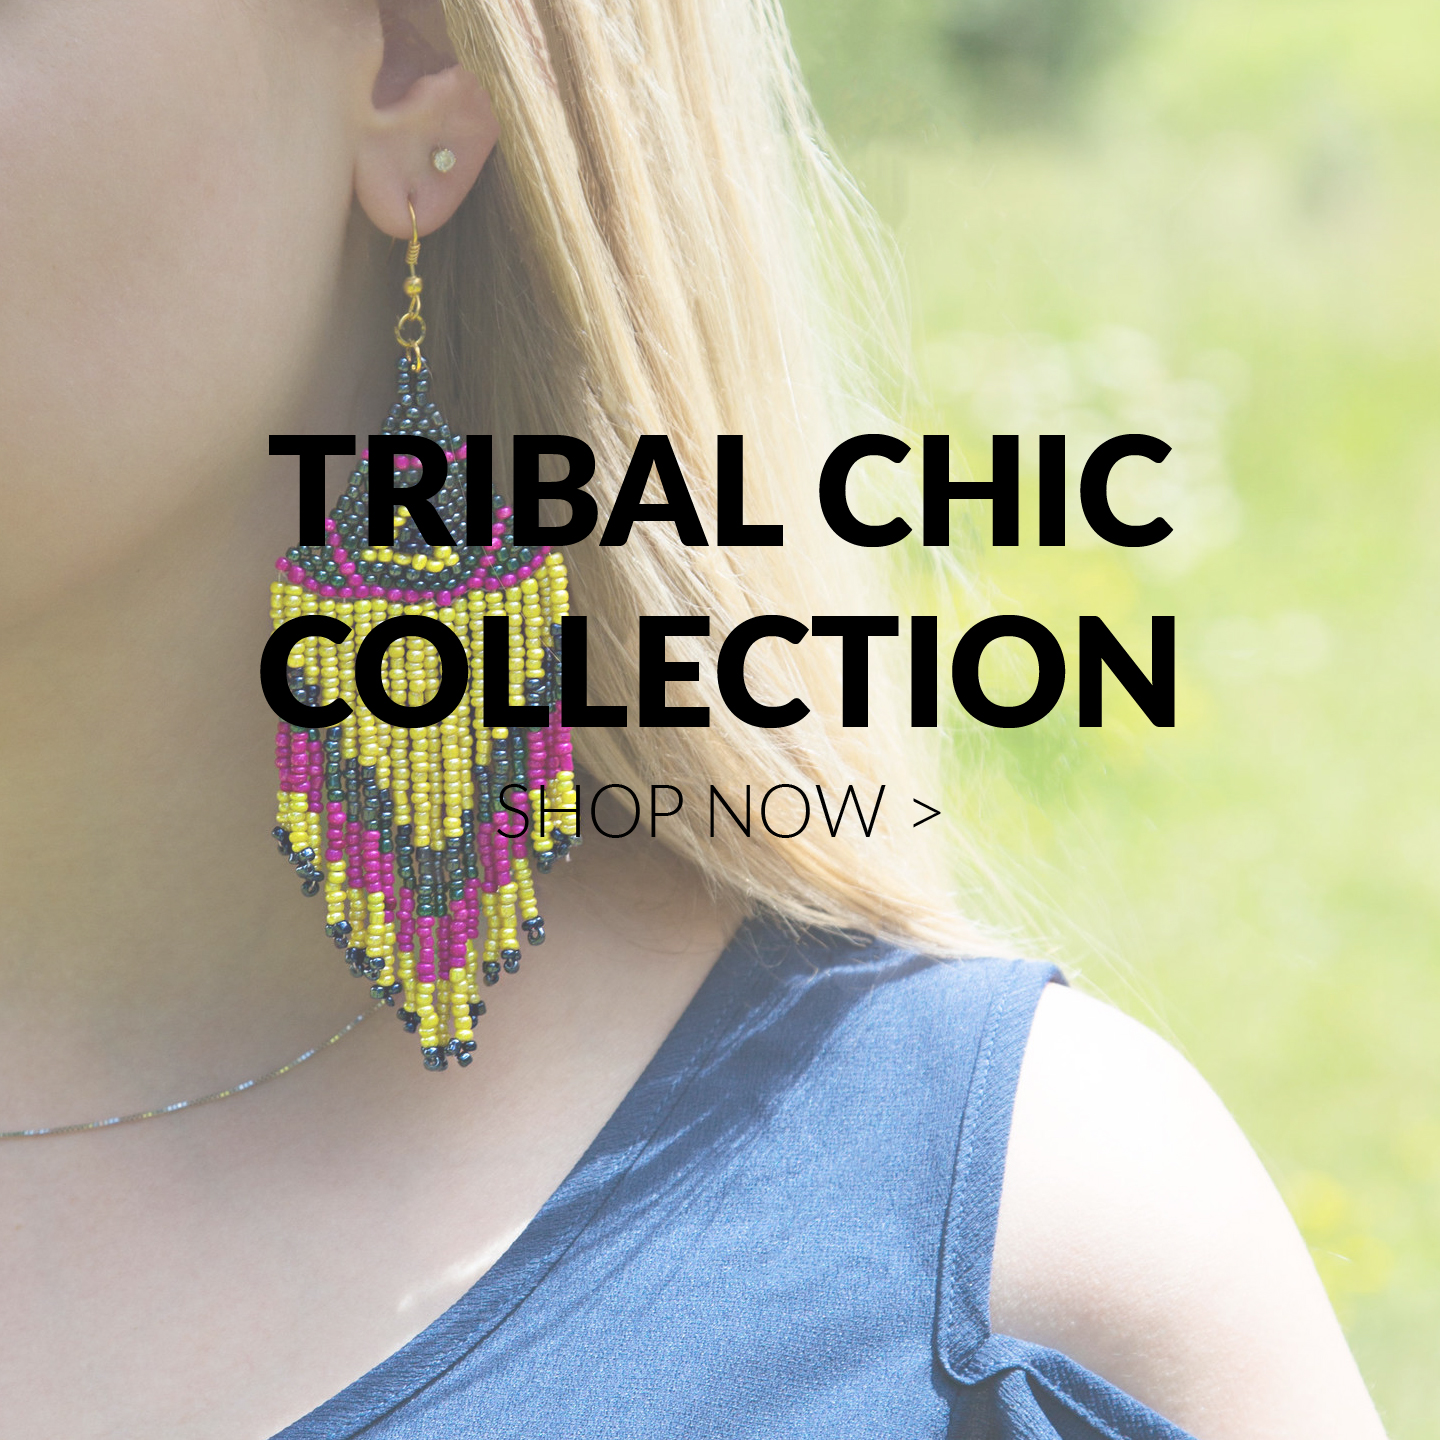 Tribal Chic Collection